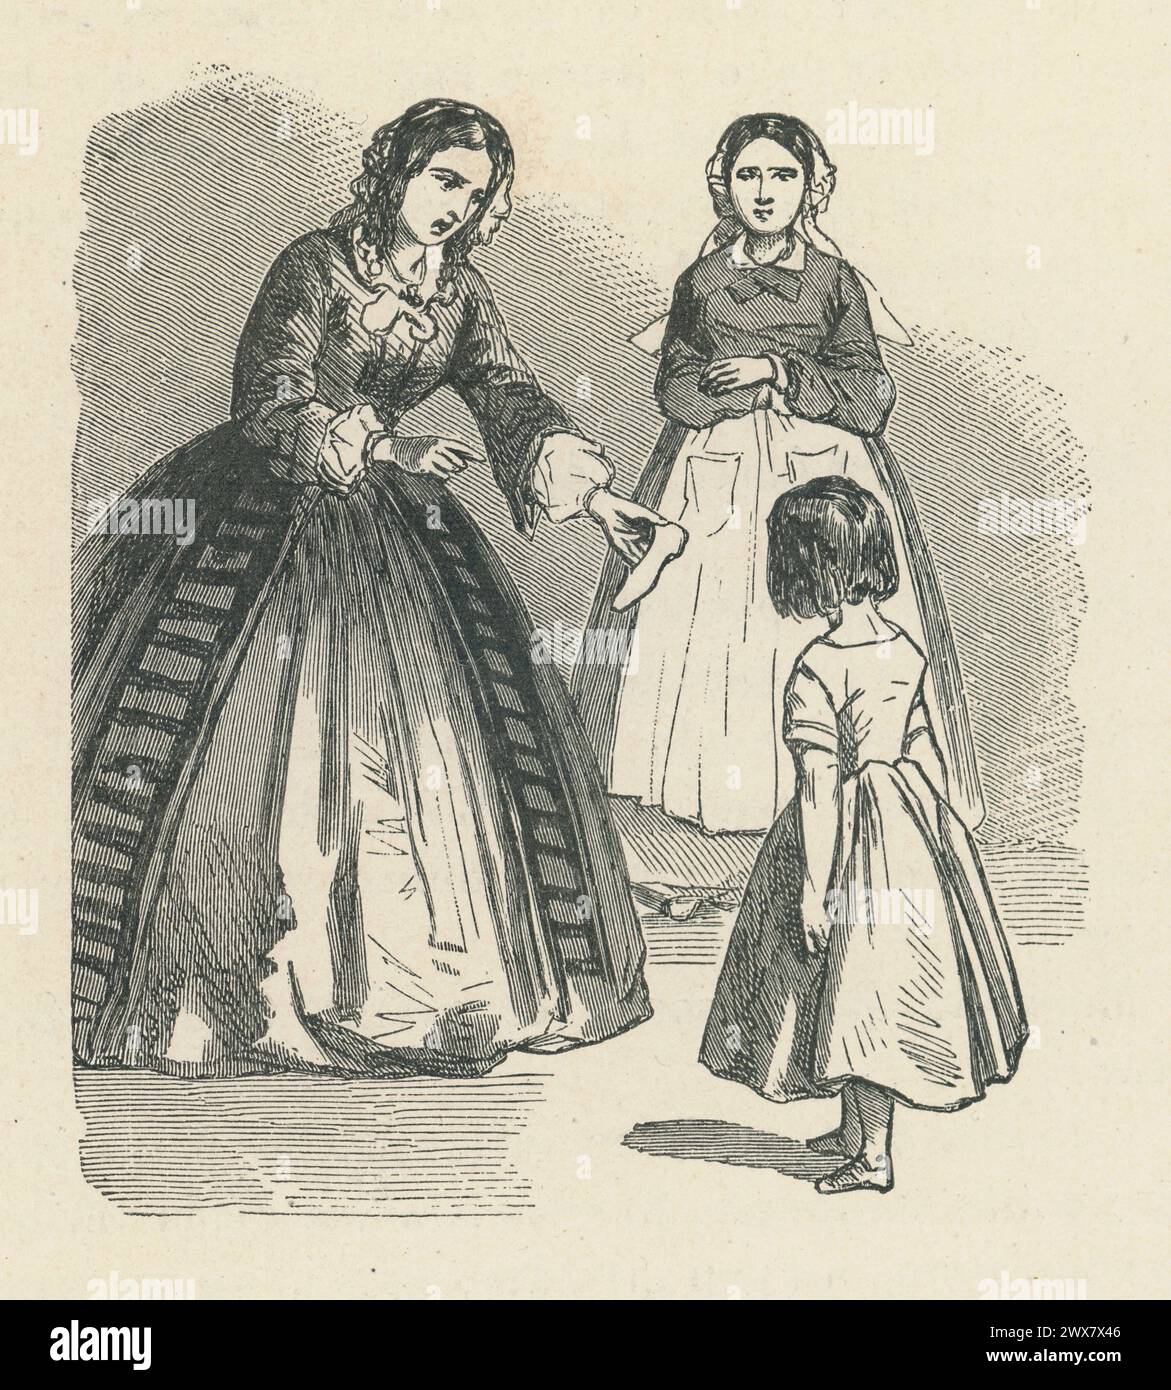 'Speak up, Sophie; explain how that pin got there?'  Illustration from 'Les malheurs de Sophie', written by the Countess of Ségur in 1858. 1880 edition illustrated by Horace Castelli and published by Hachette. Stock Photo